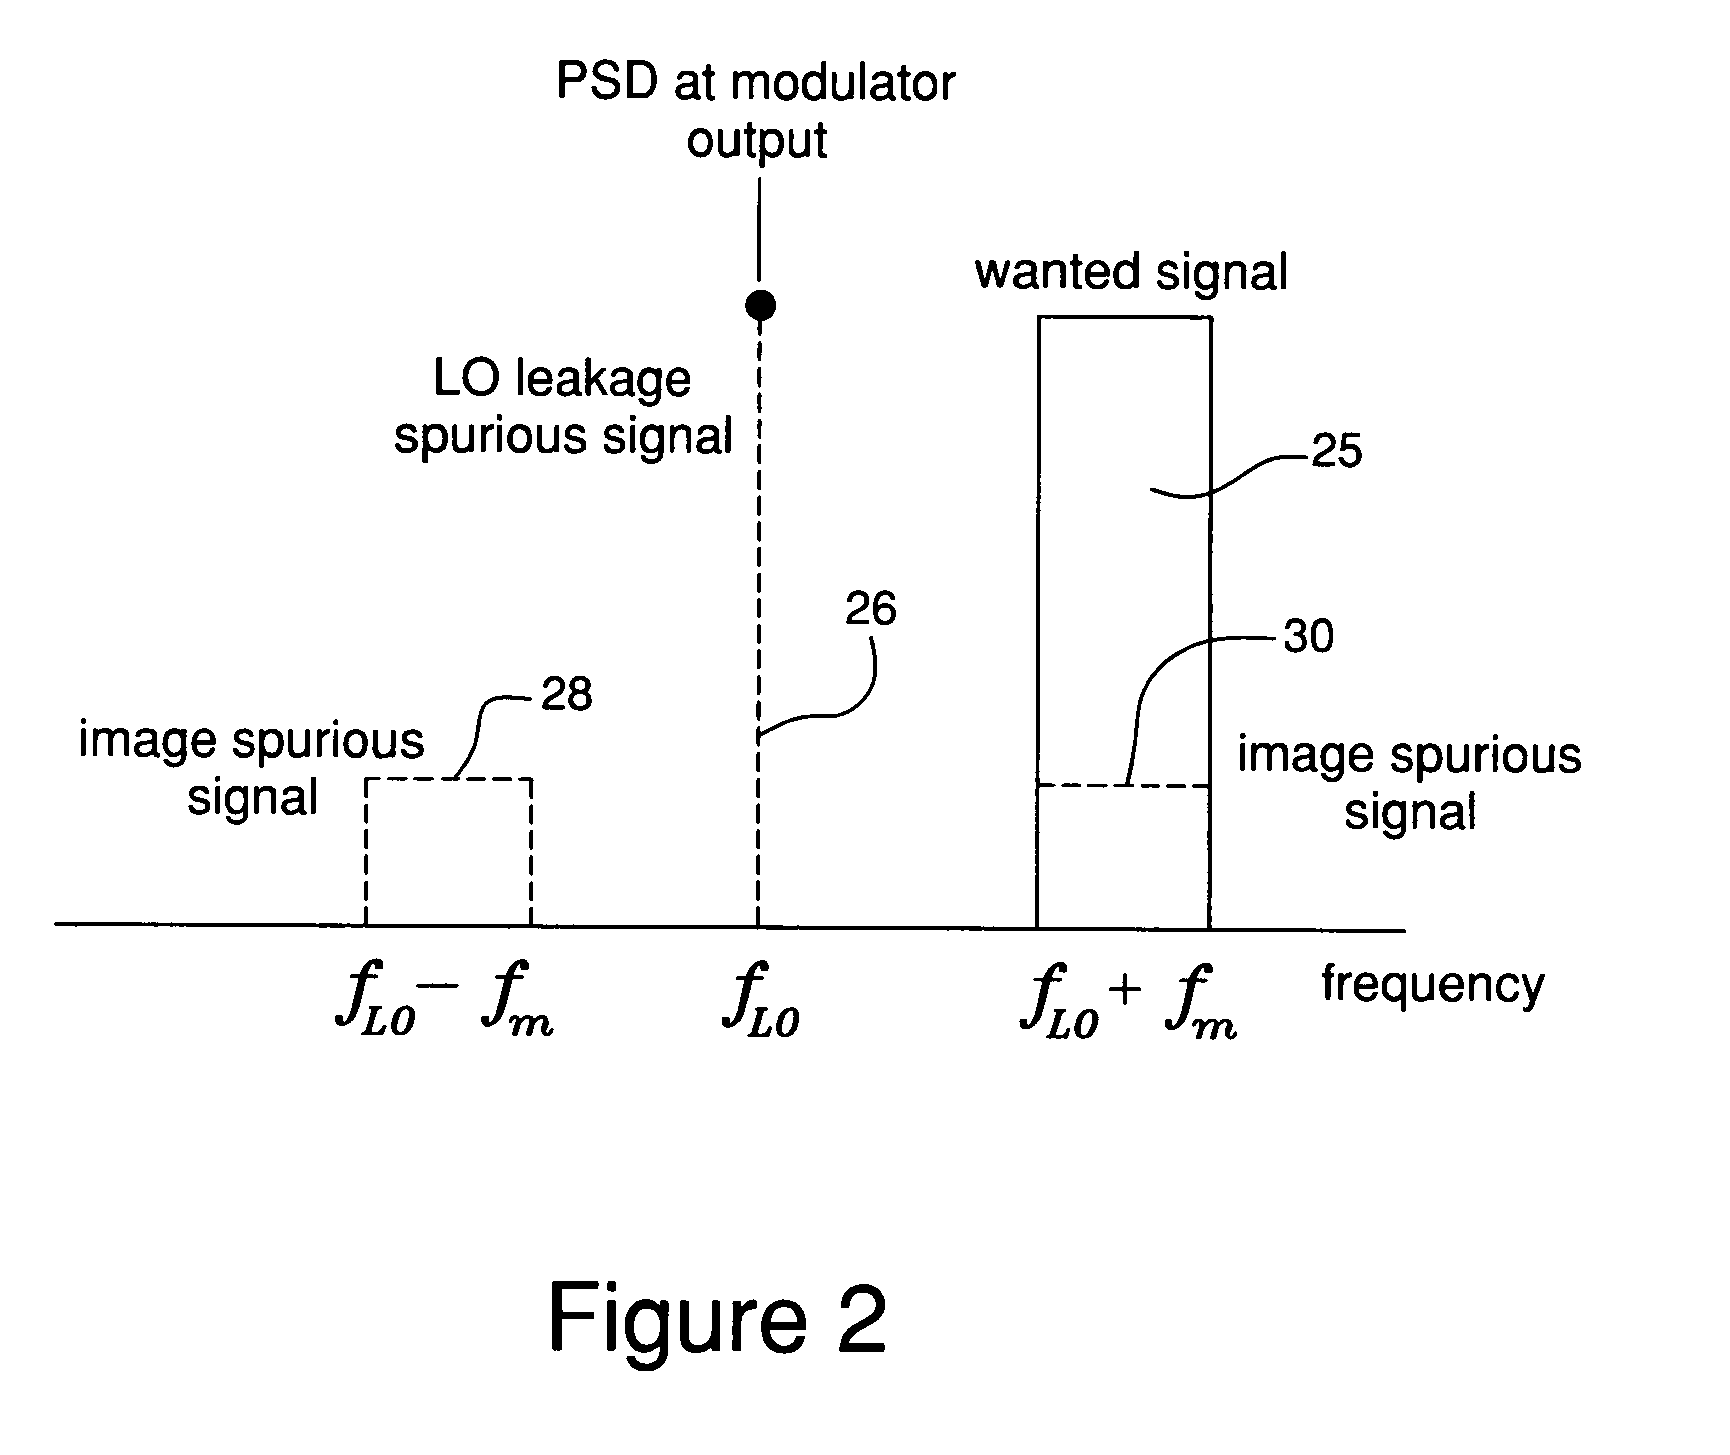 Frequency conversion techniques using antiphase mixing